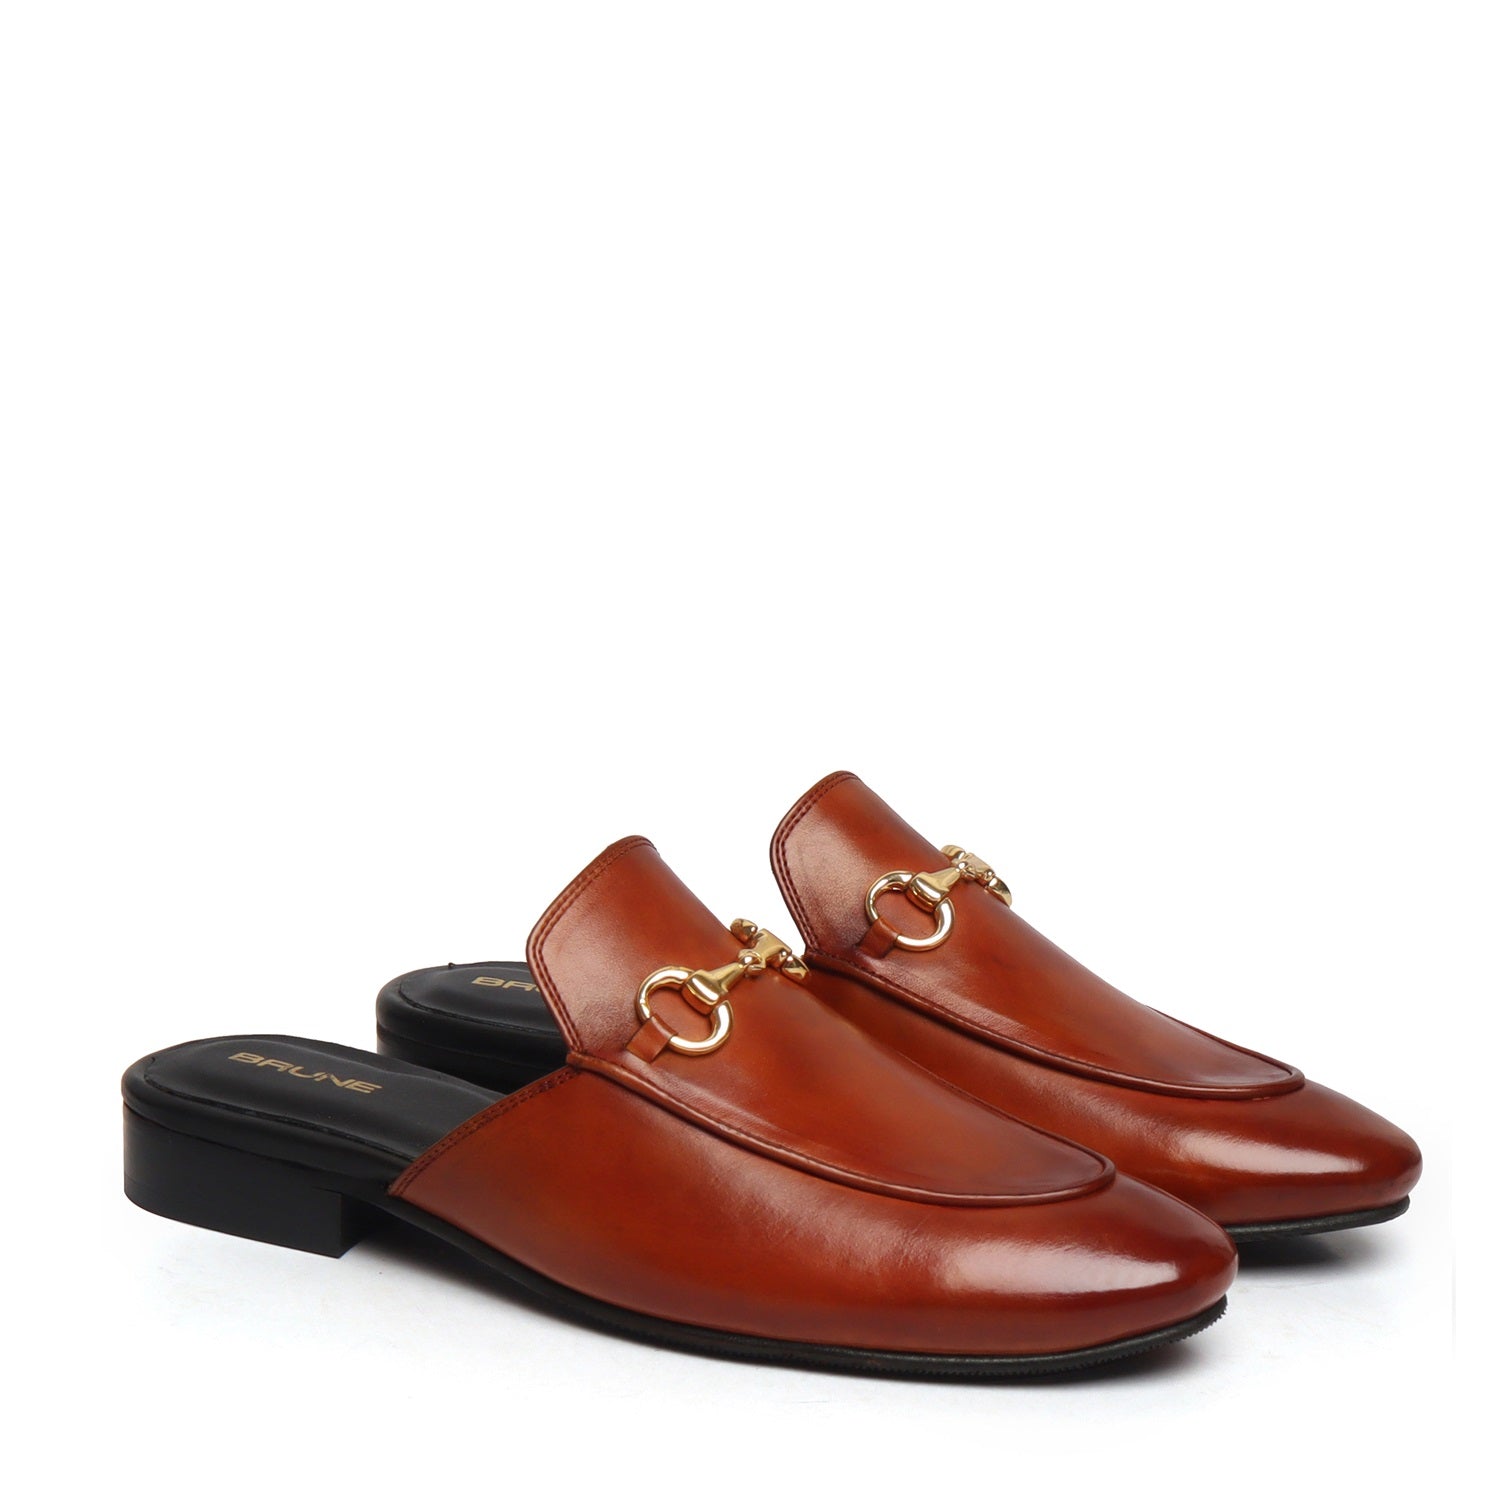 Tan Leather Formal Shoe With Slipper Opening At The Back (Summer Special) By Brune & Bareskin